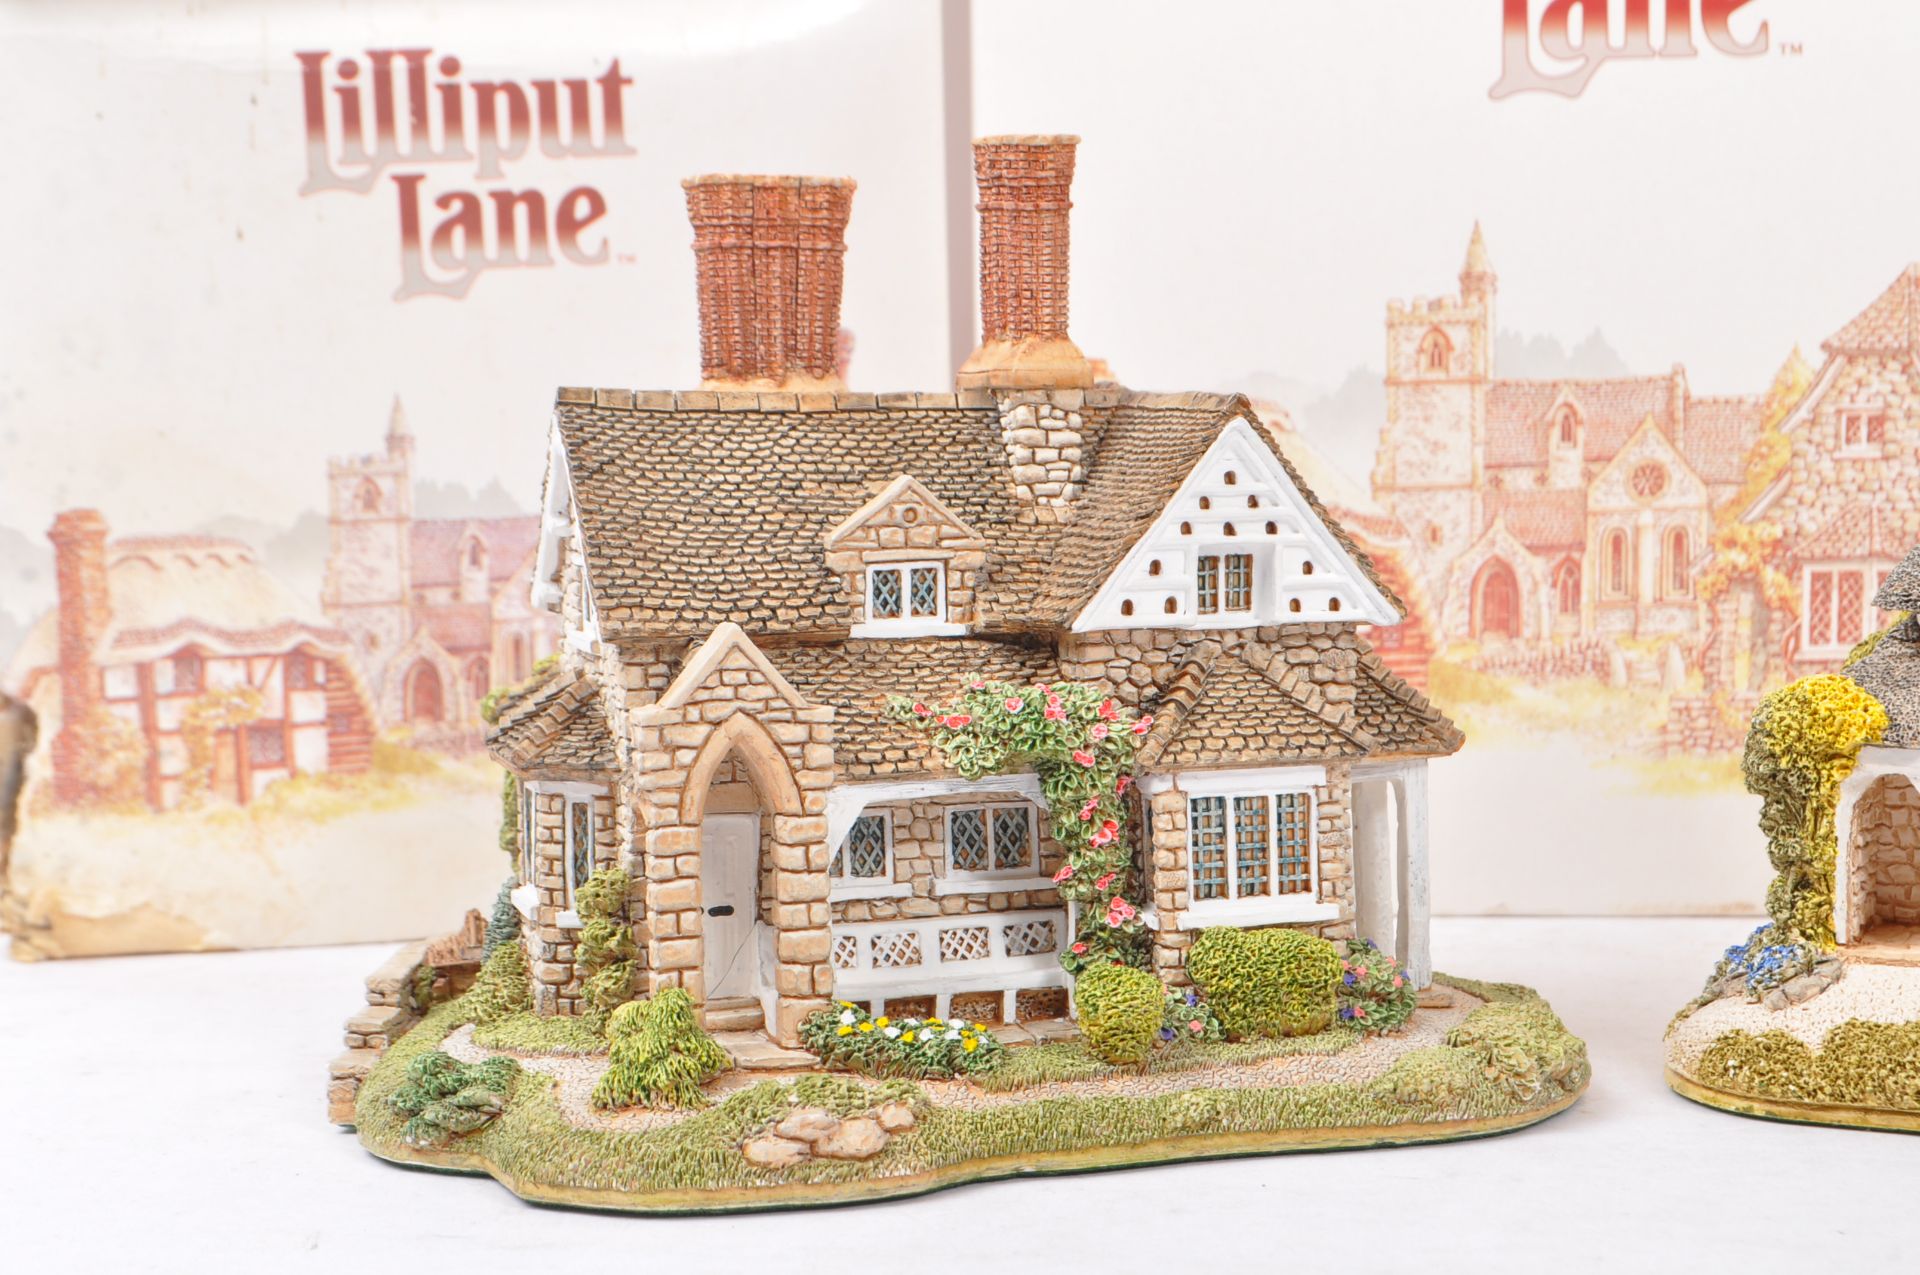 LILLIPUT LANE - COLLECTION OF HOUSE / COTTAGE RESIN FIGURINES - Image 4 of 9